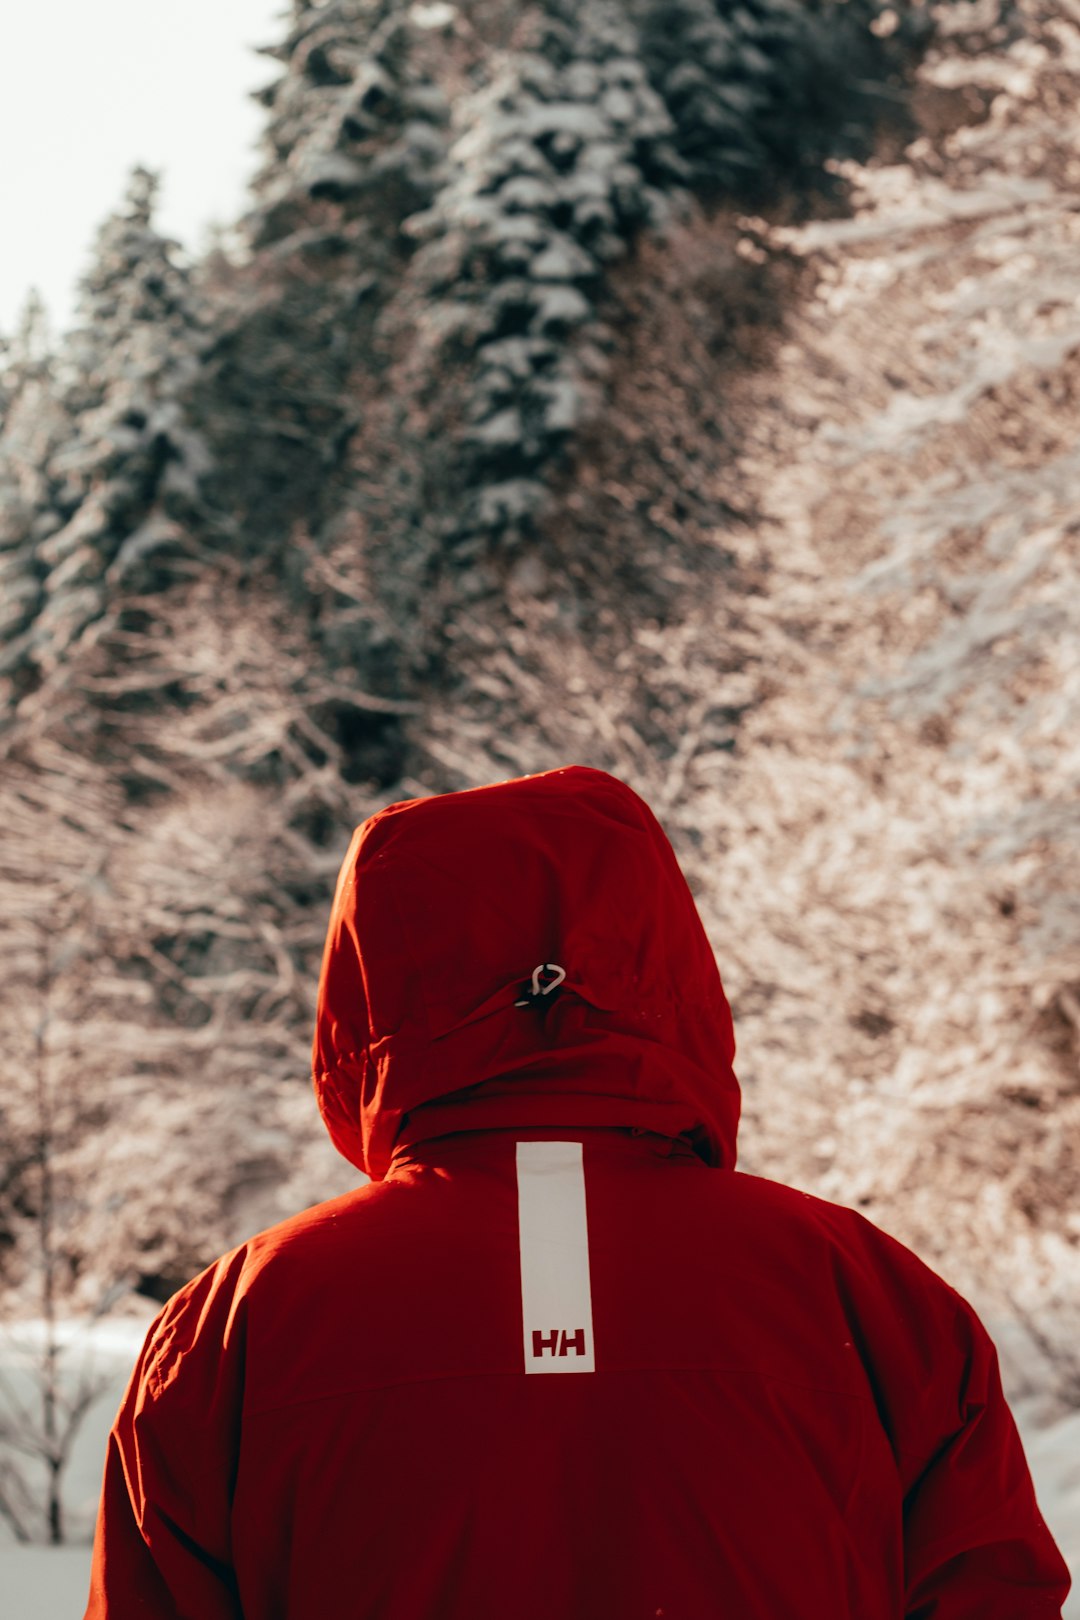 person wearing red hooded top near trees during winter